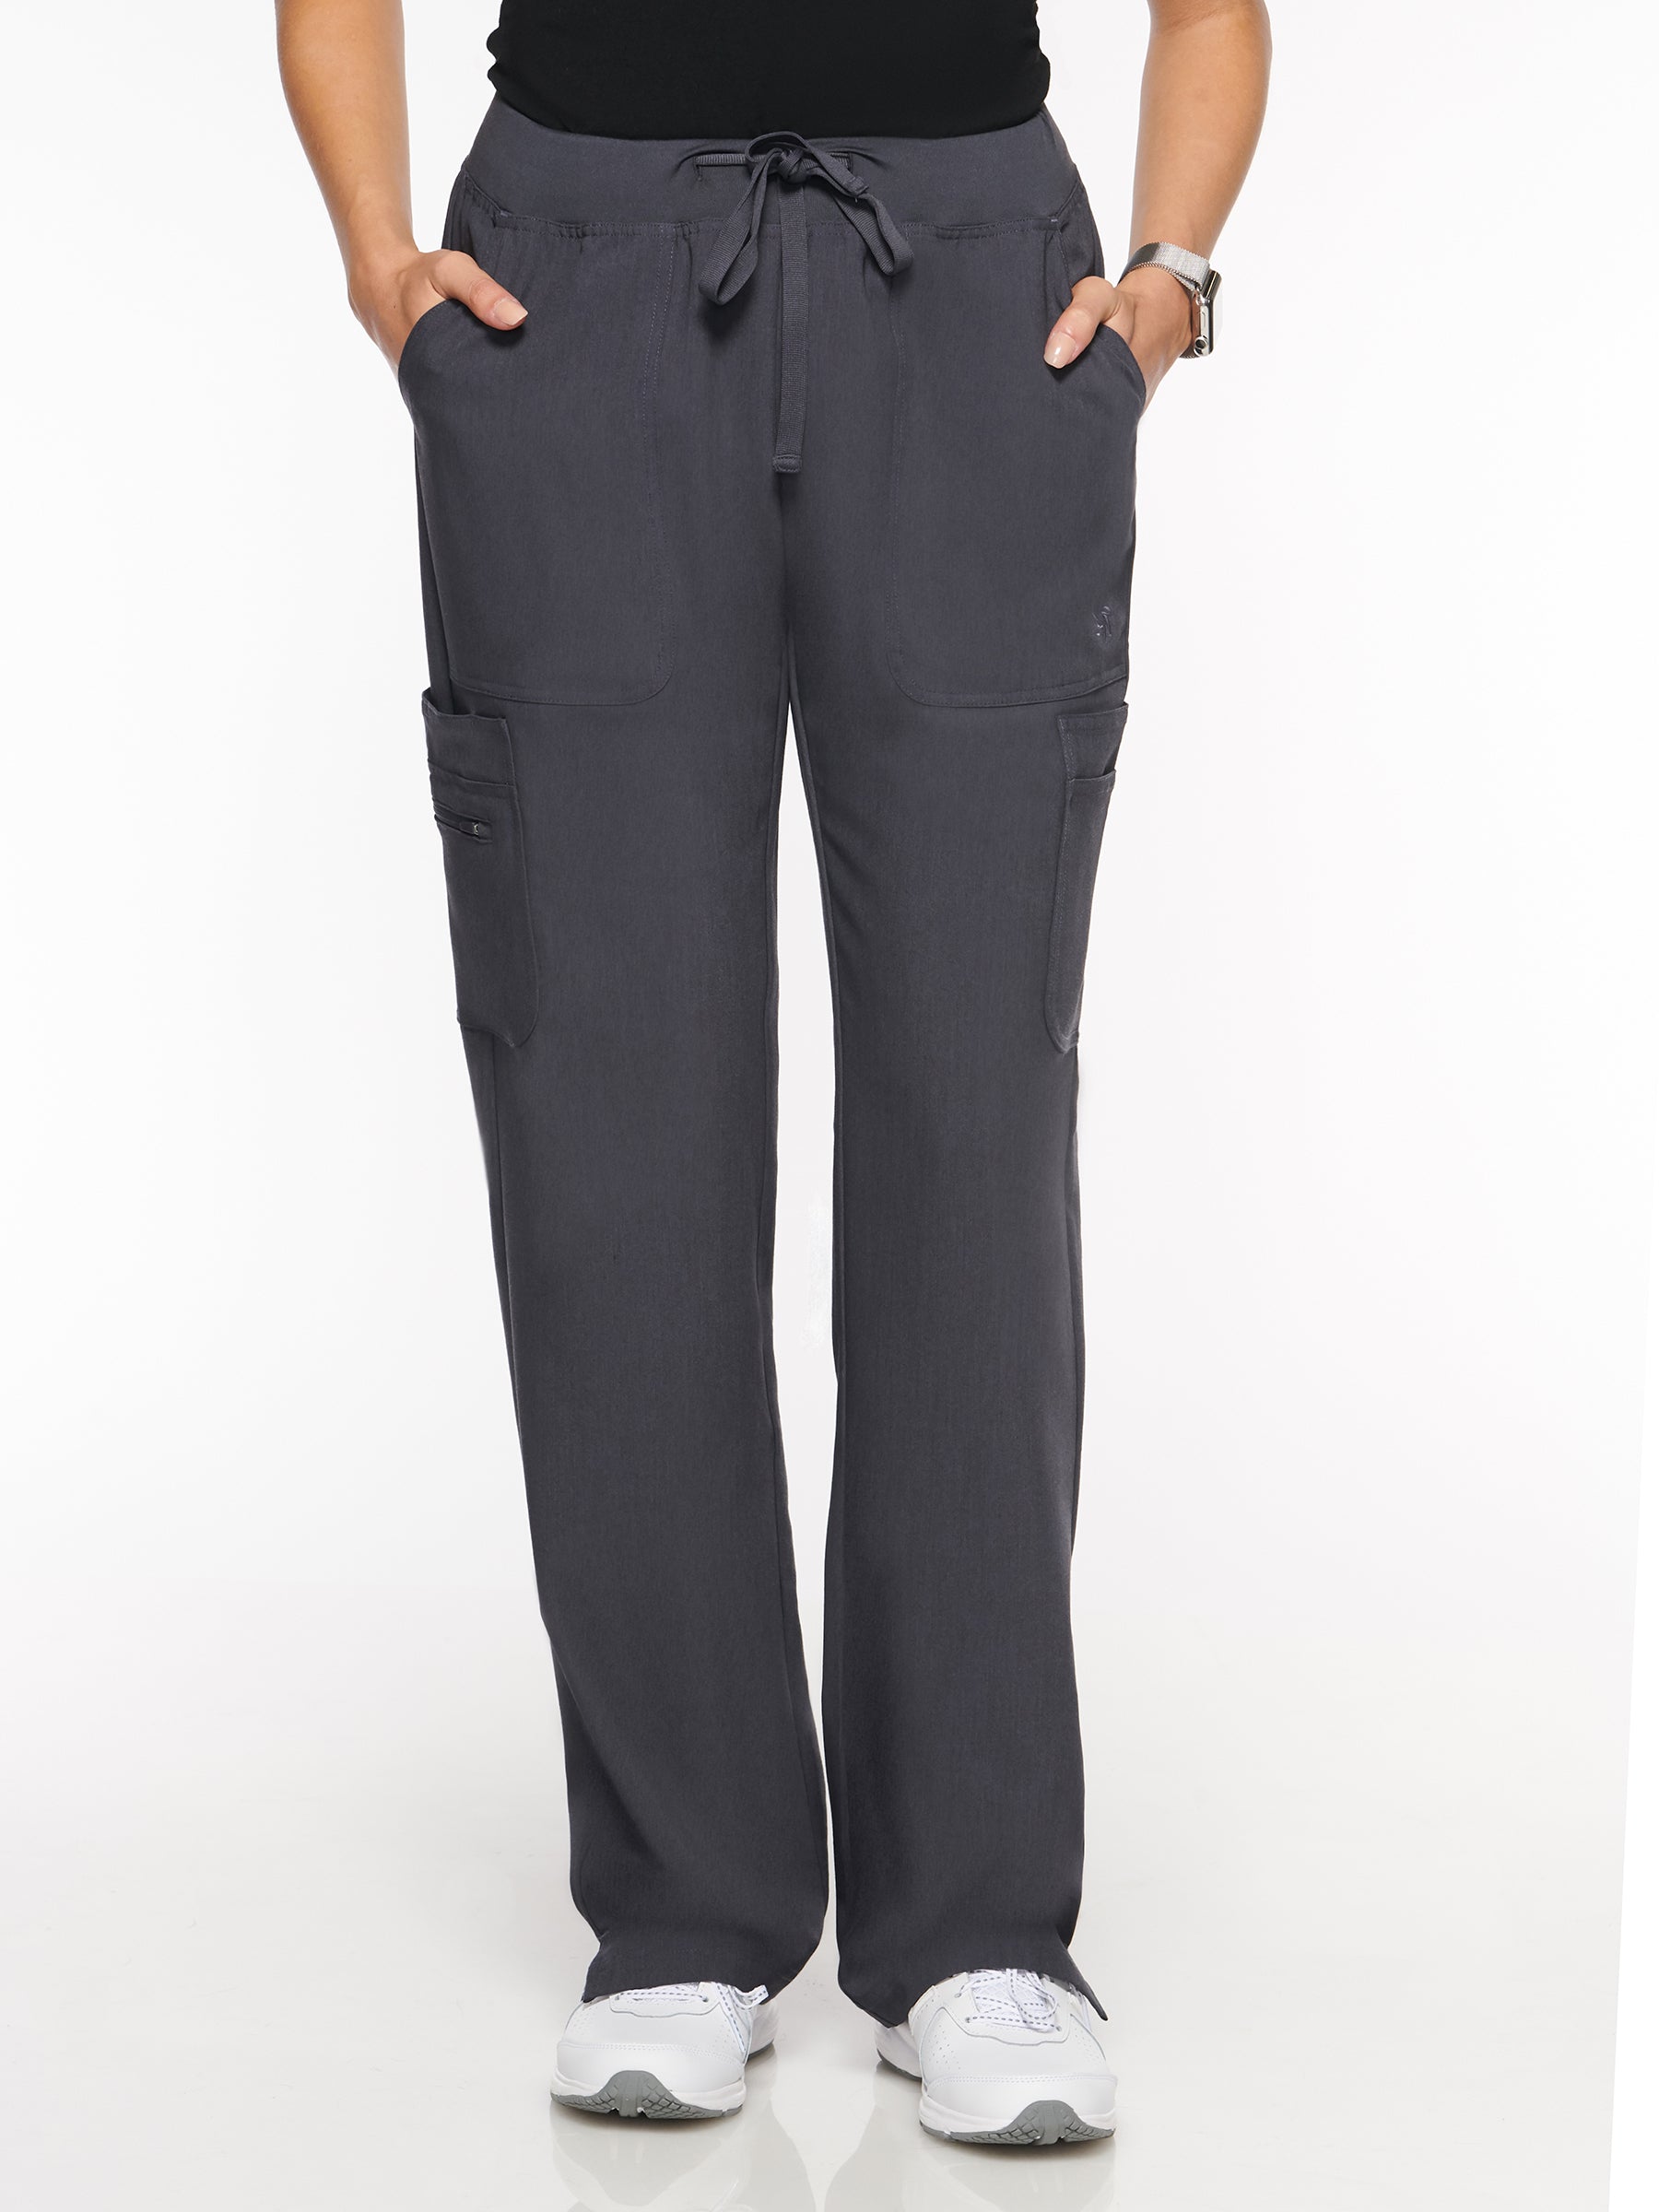 Pacific Womens Pant Yoga Pant with 9 Pockets - Petite (93002P)